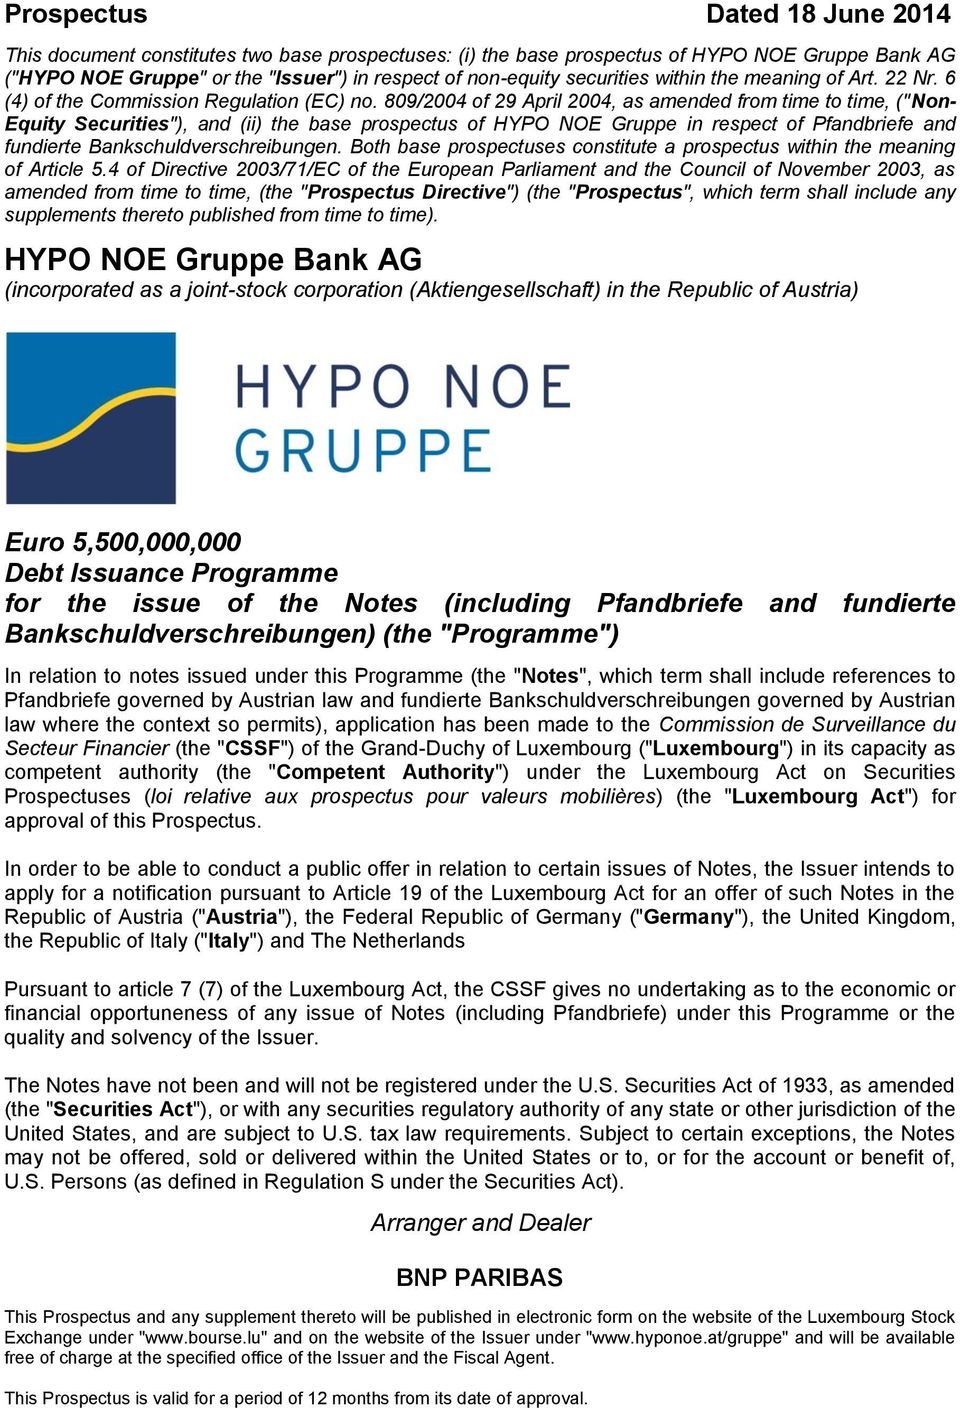 809/2004 of 29 April 2004, as amended from time to time, ("Non- Equity Securities"), and (ii) the base prospectus of HYPO NOE Gruppe in respect of Pfandbriefe and fundierte Bankschuldverschreibungen.